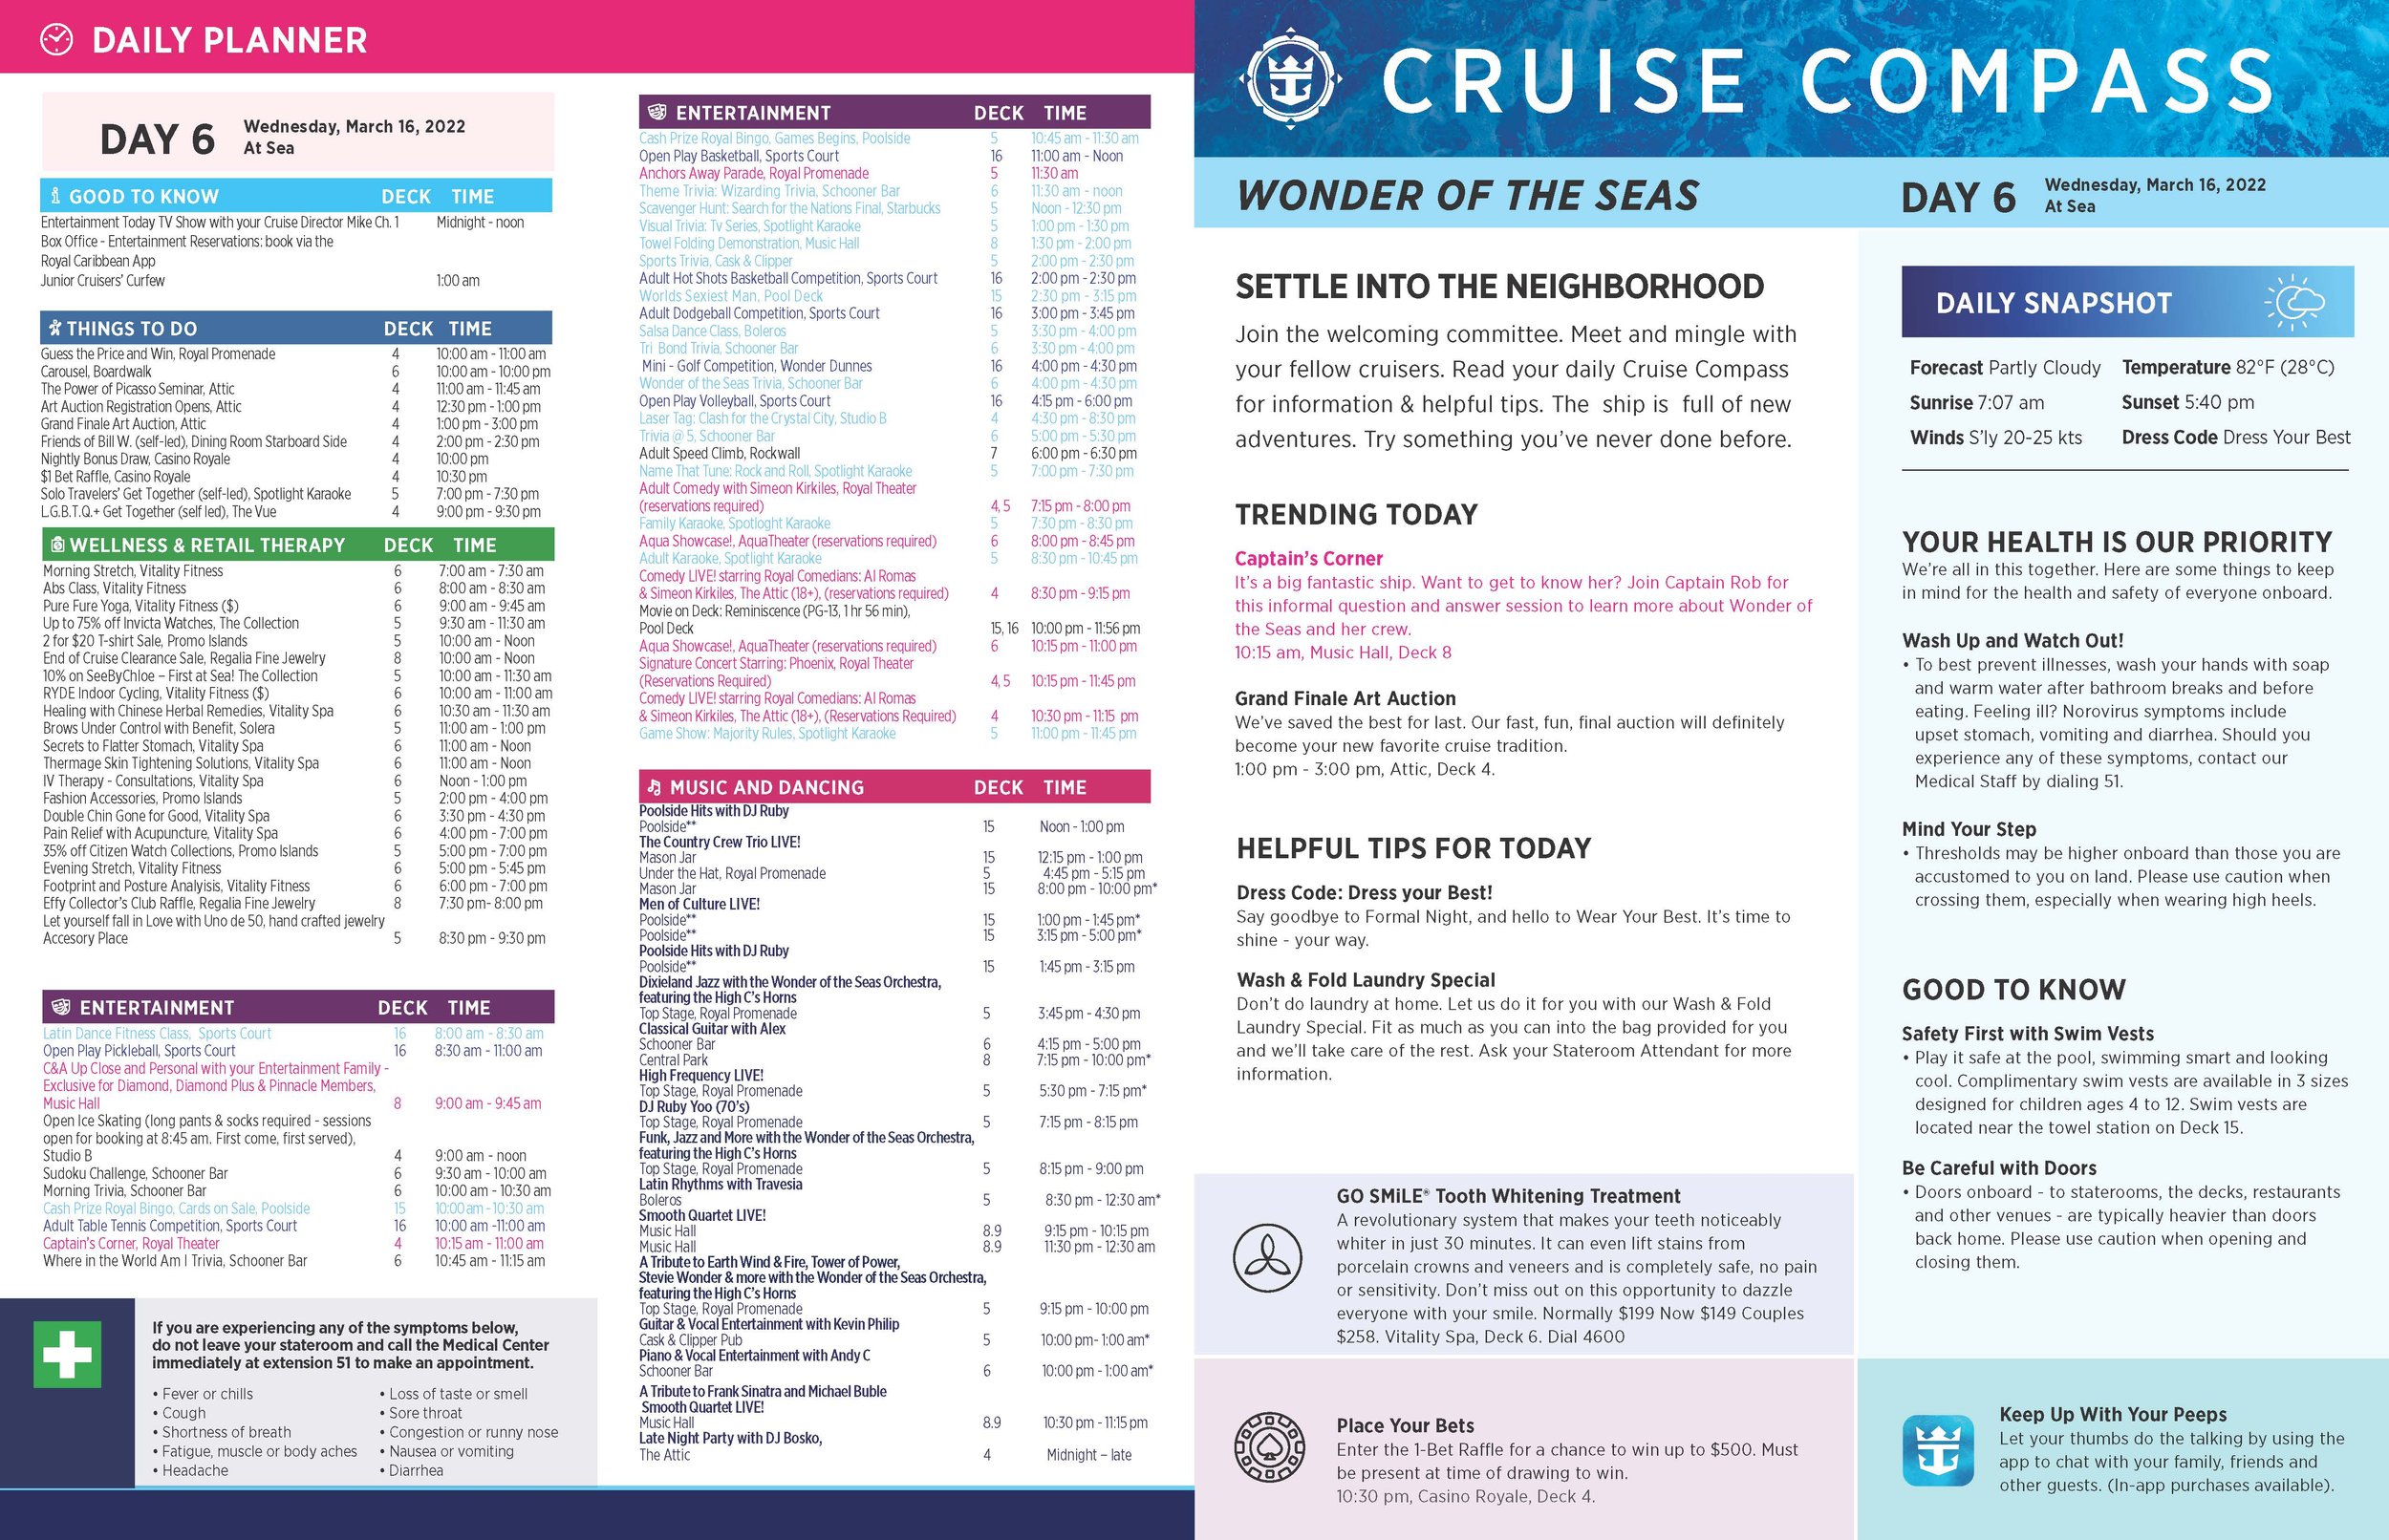 Cruise Compass - Day 6 - Wednesday, March 16. 2022,  At Sea_Page_1.jpg